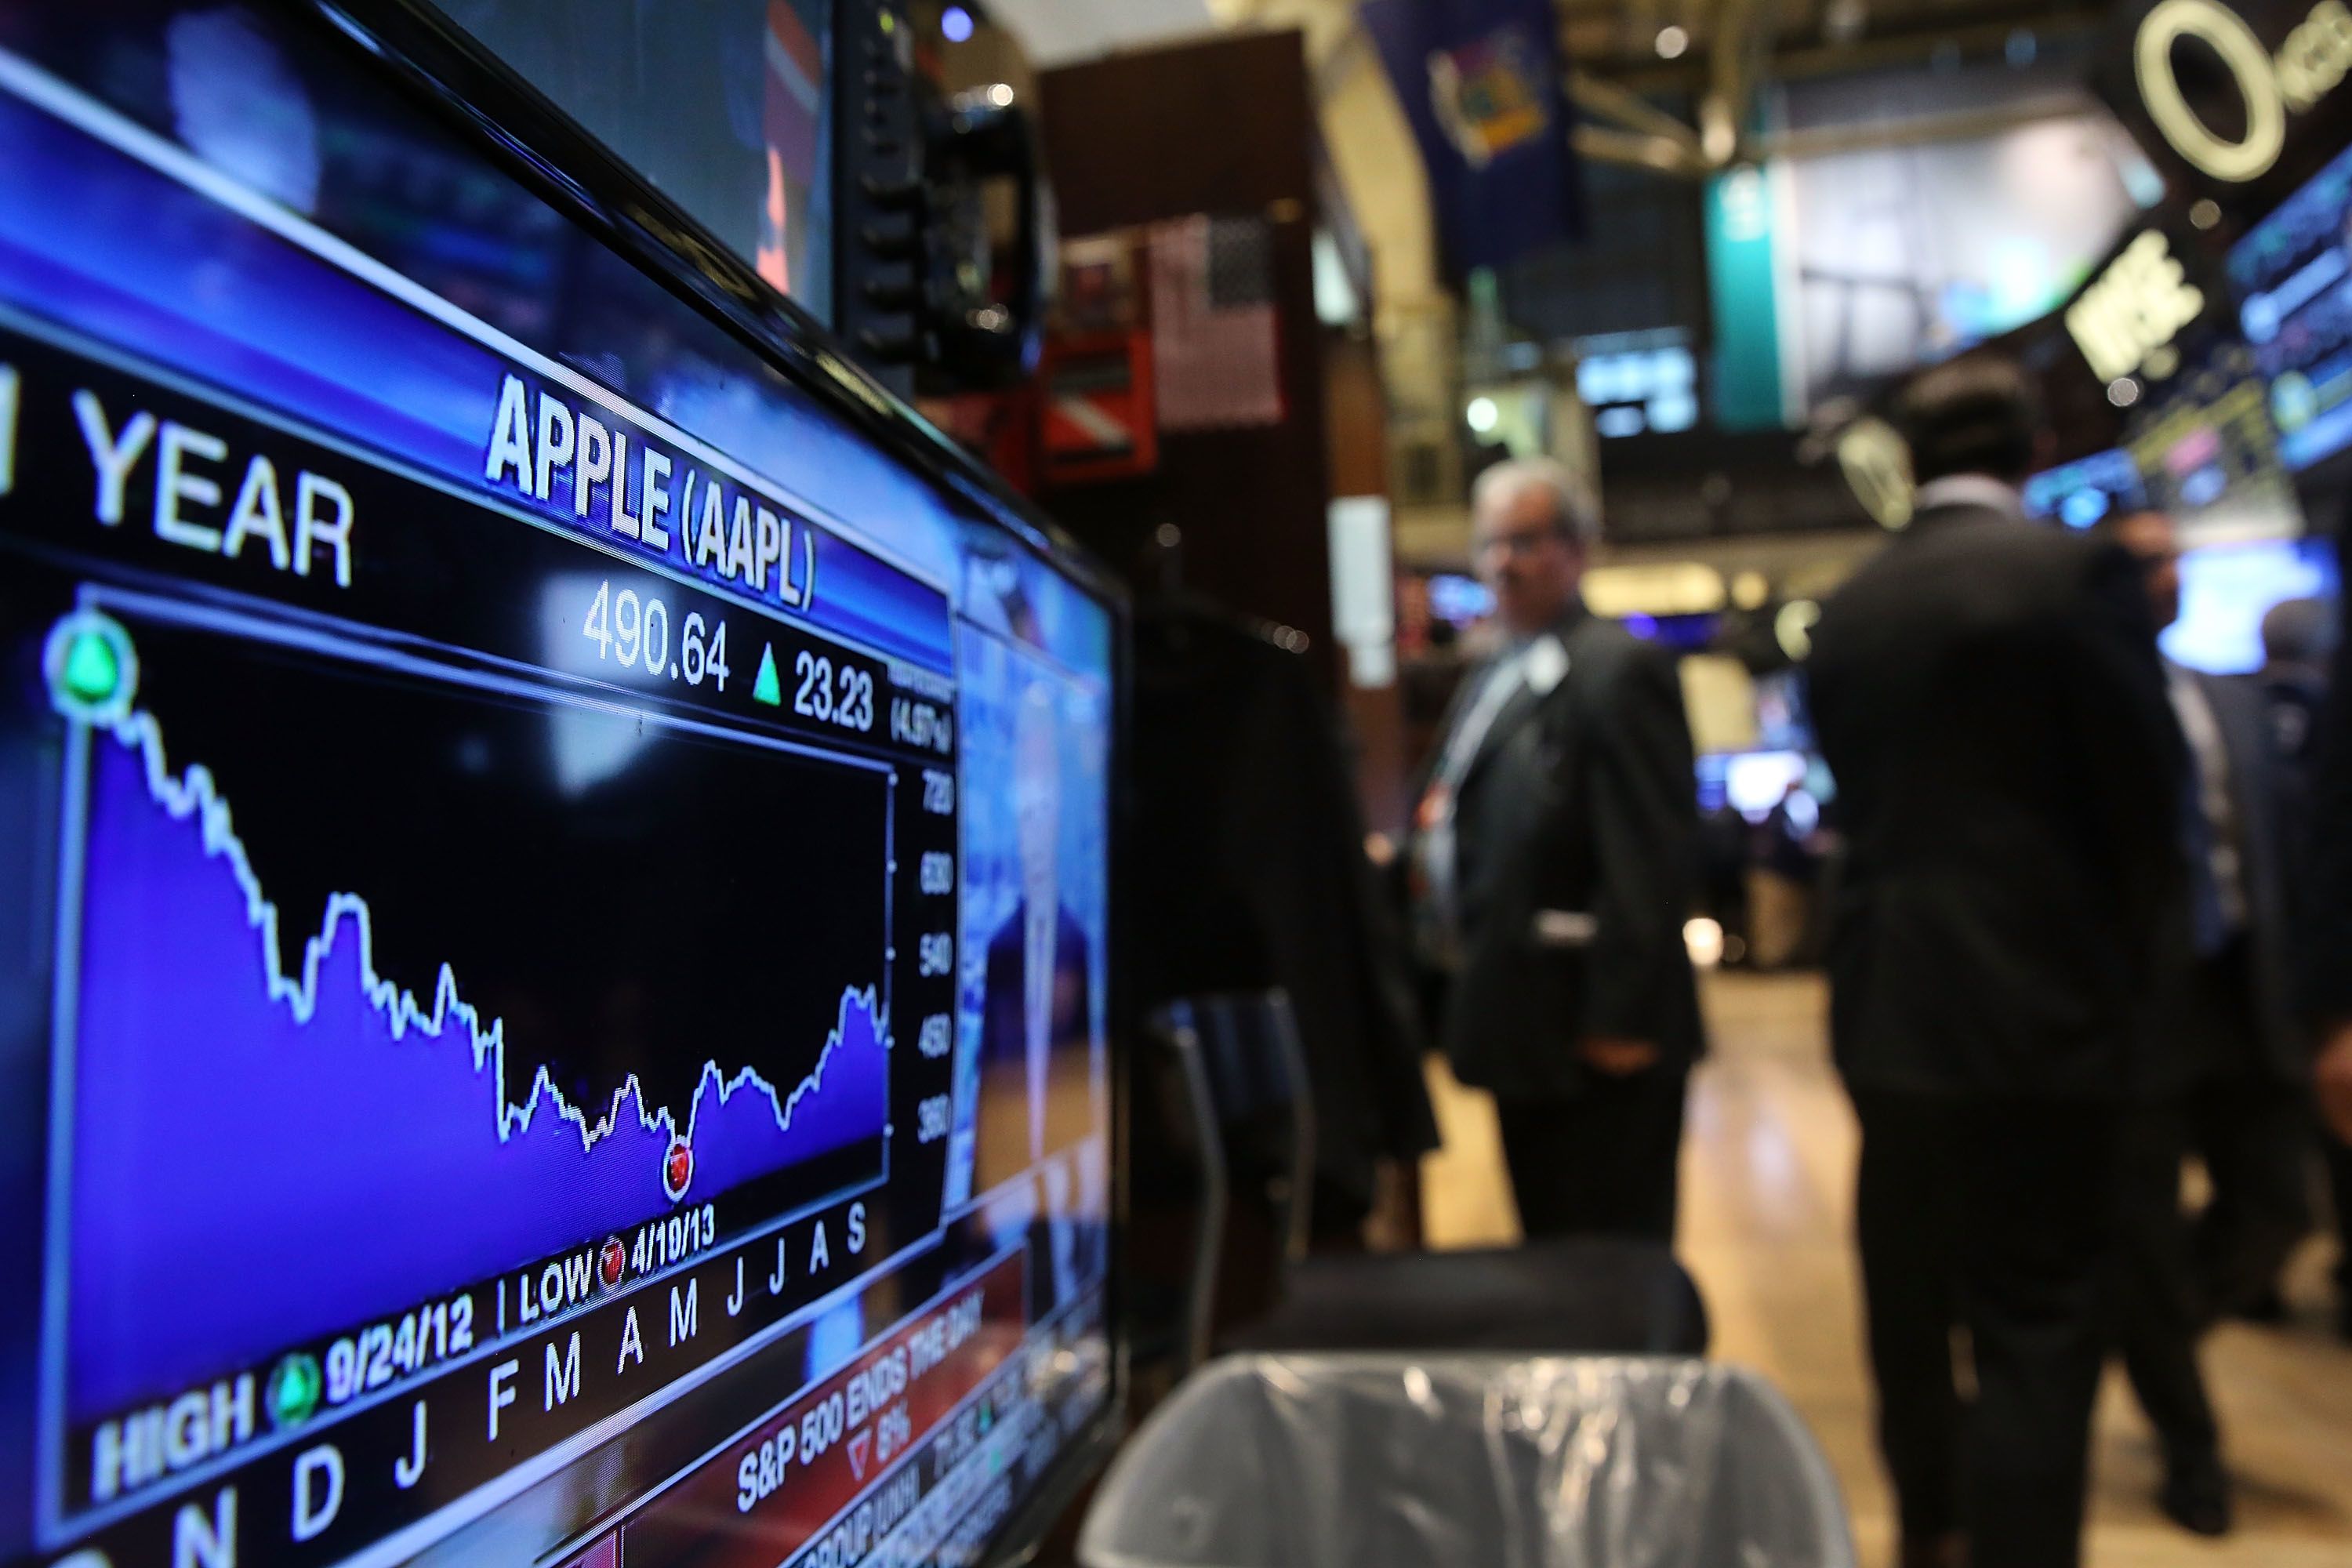 Morgan Stanley's call on Apple defies conventional wisdom